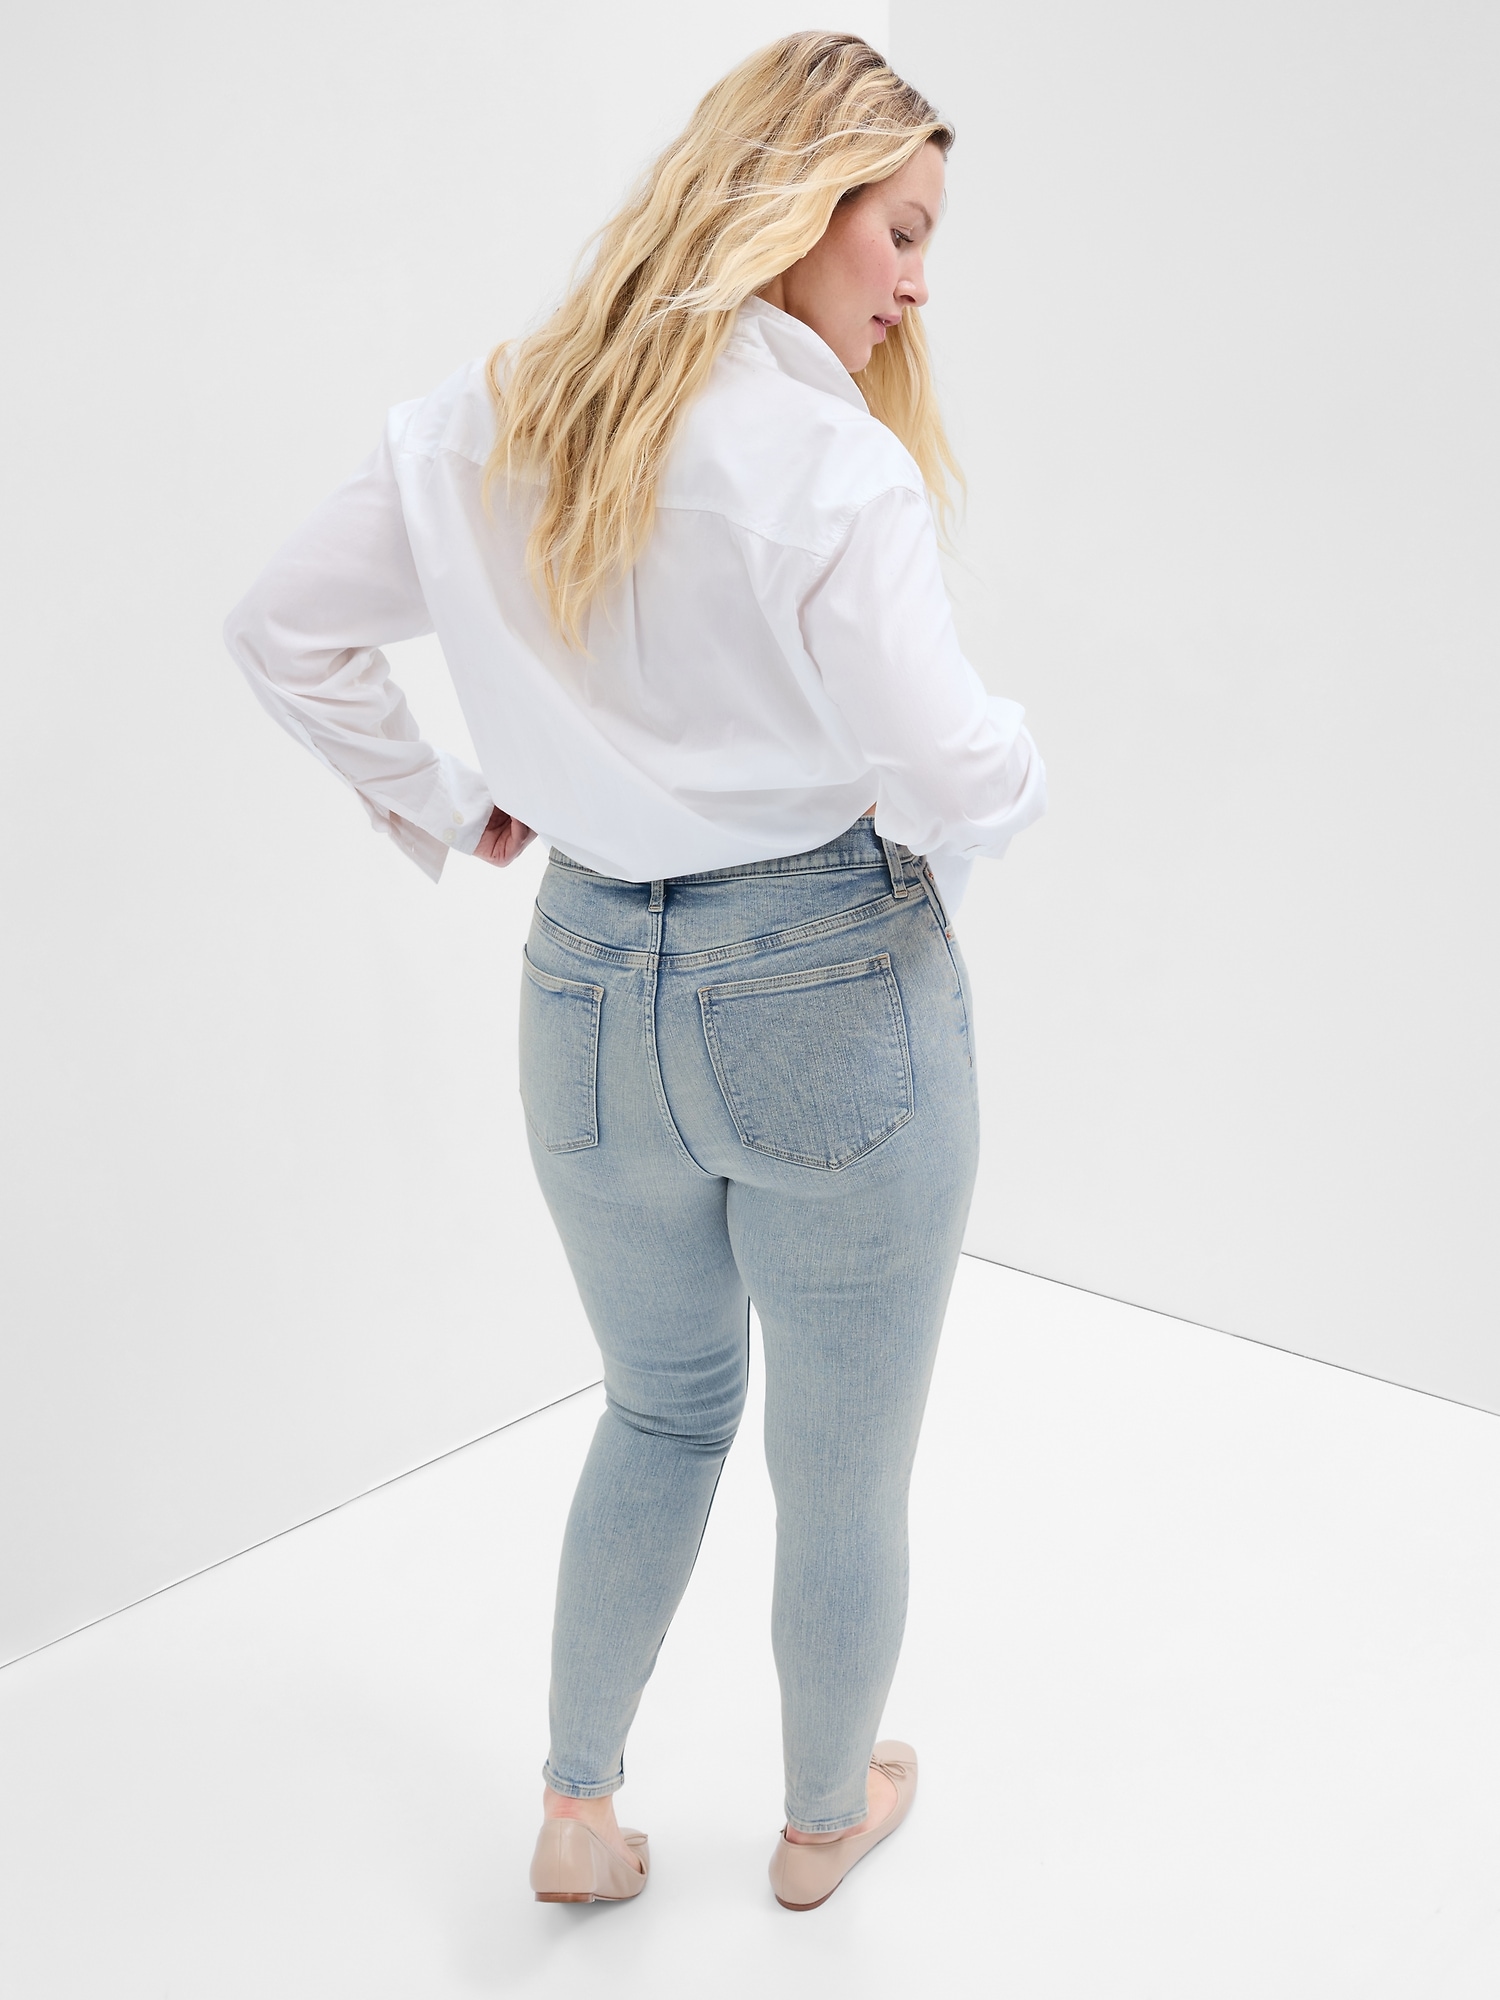 Buy Gap High Waisted Washwell Jeggings from the Gap online shop